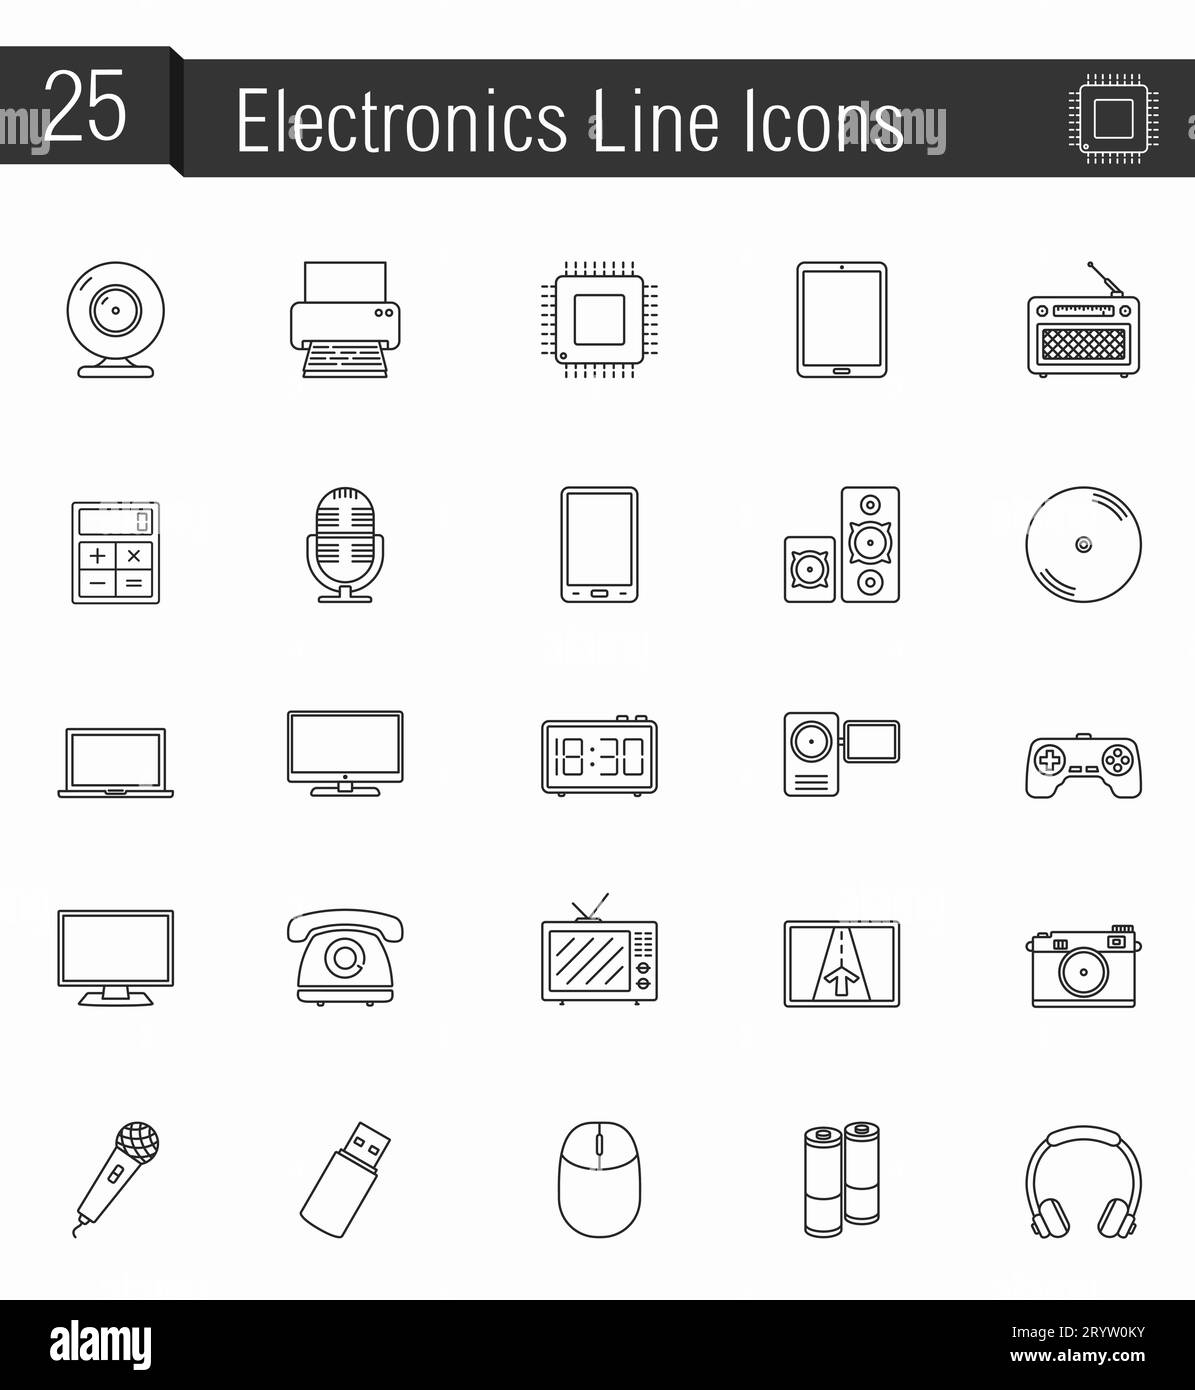 25 Electronics line icons, vector eps10 illustration Stock Vector